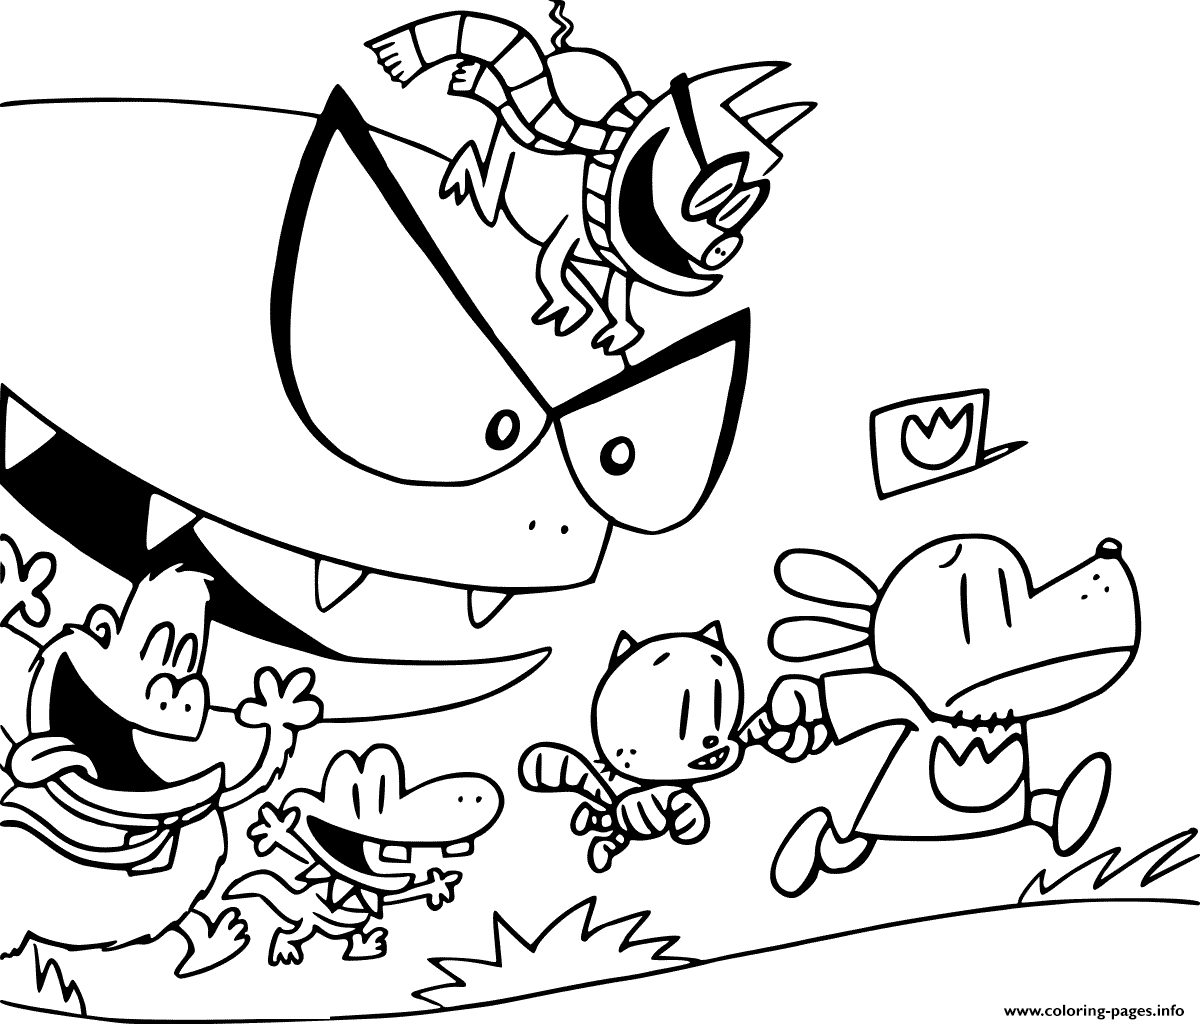 Dog Man Is Running From Bad Guys Coloring page Printable